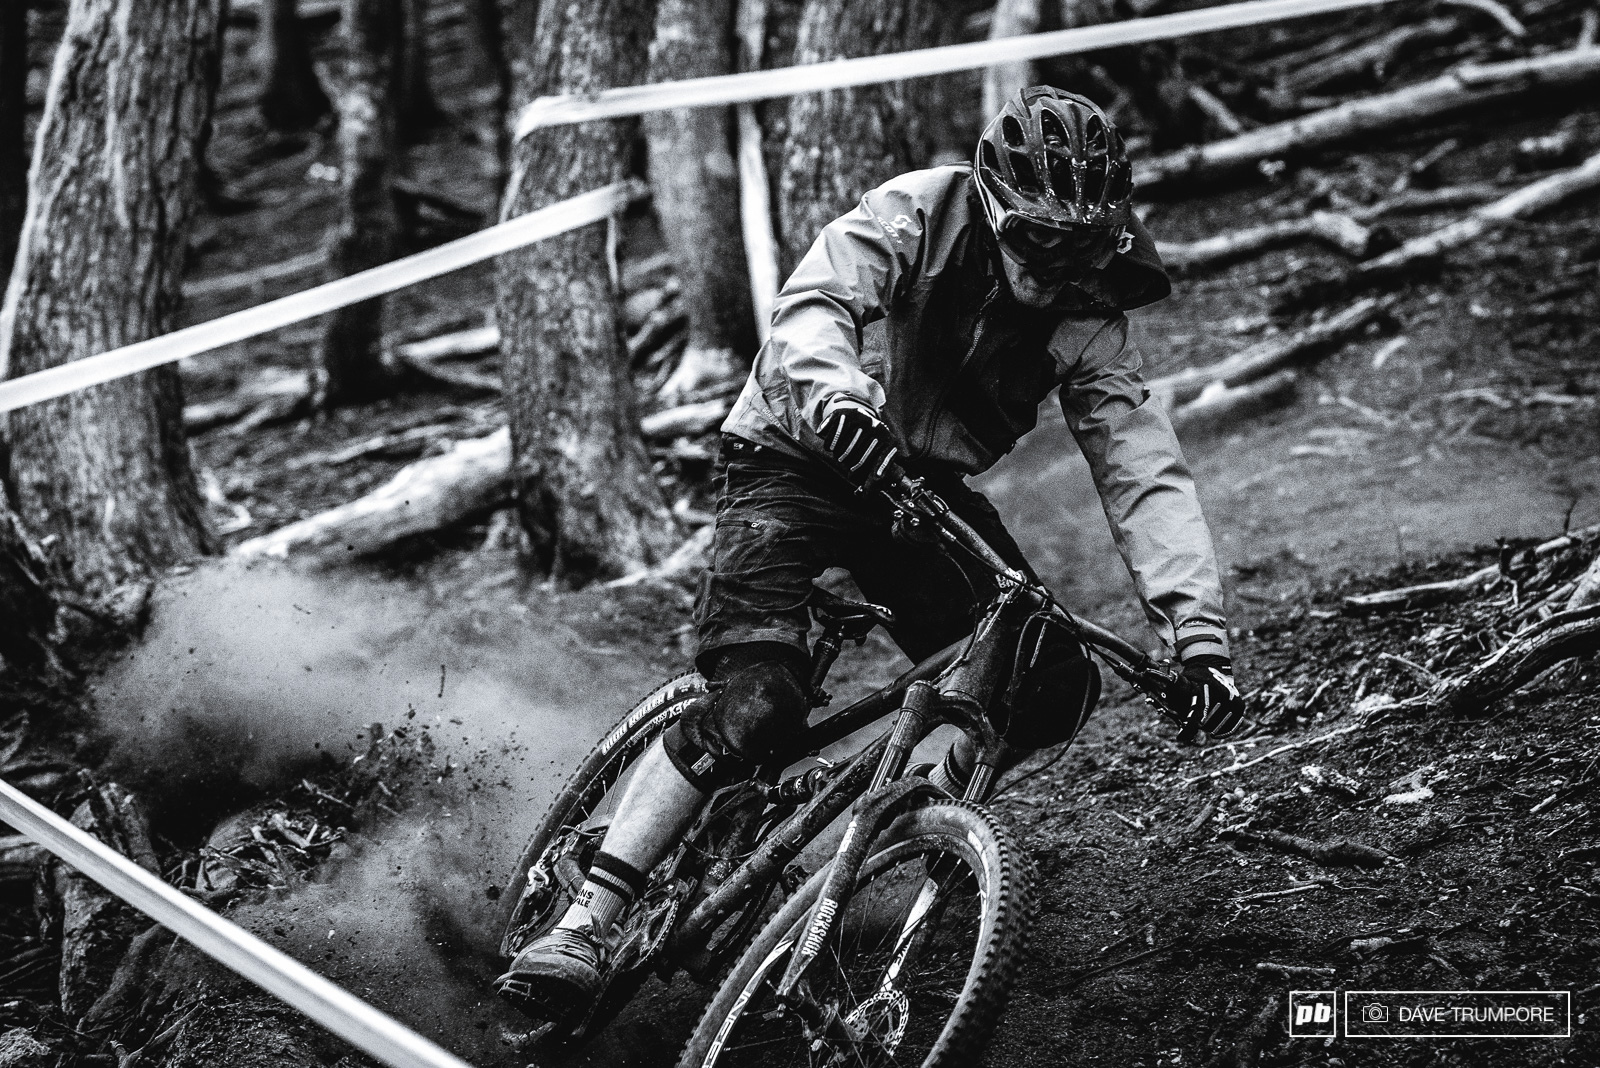 Wednesdays are the days the Photographers and videographers live for. After long hard days in Chile we rewarded ourselves by ripping down all the stages one day before the racers. If you enjoy all the EWS video footage thank this guy.